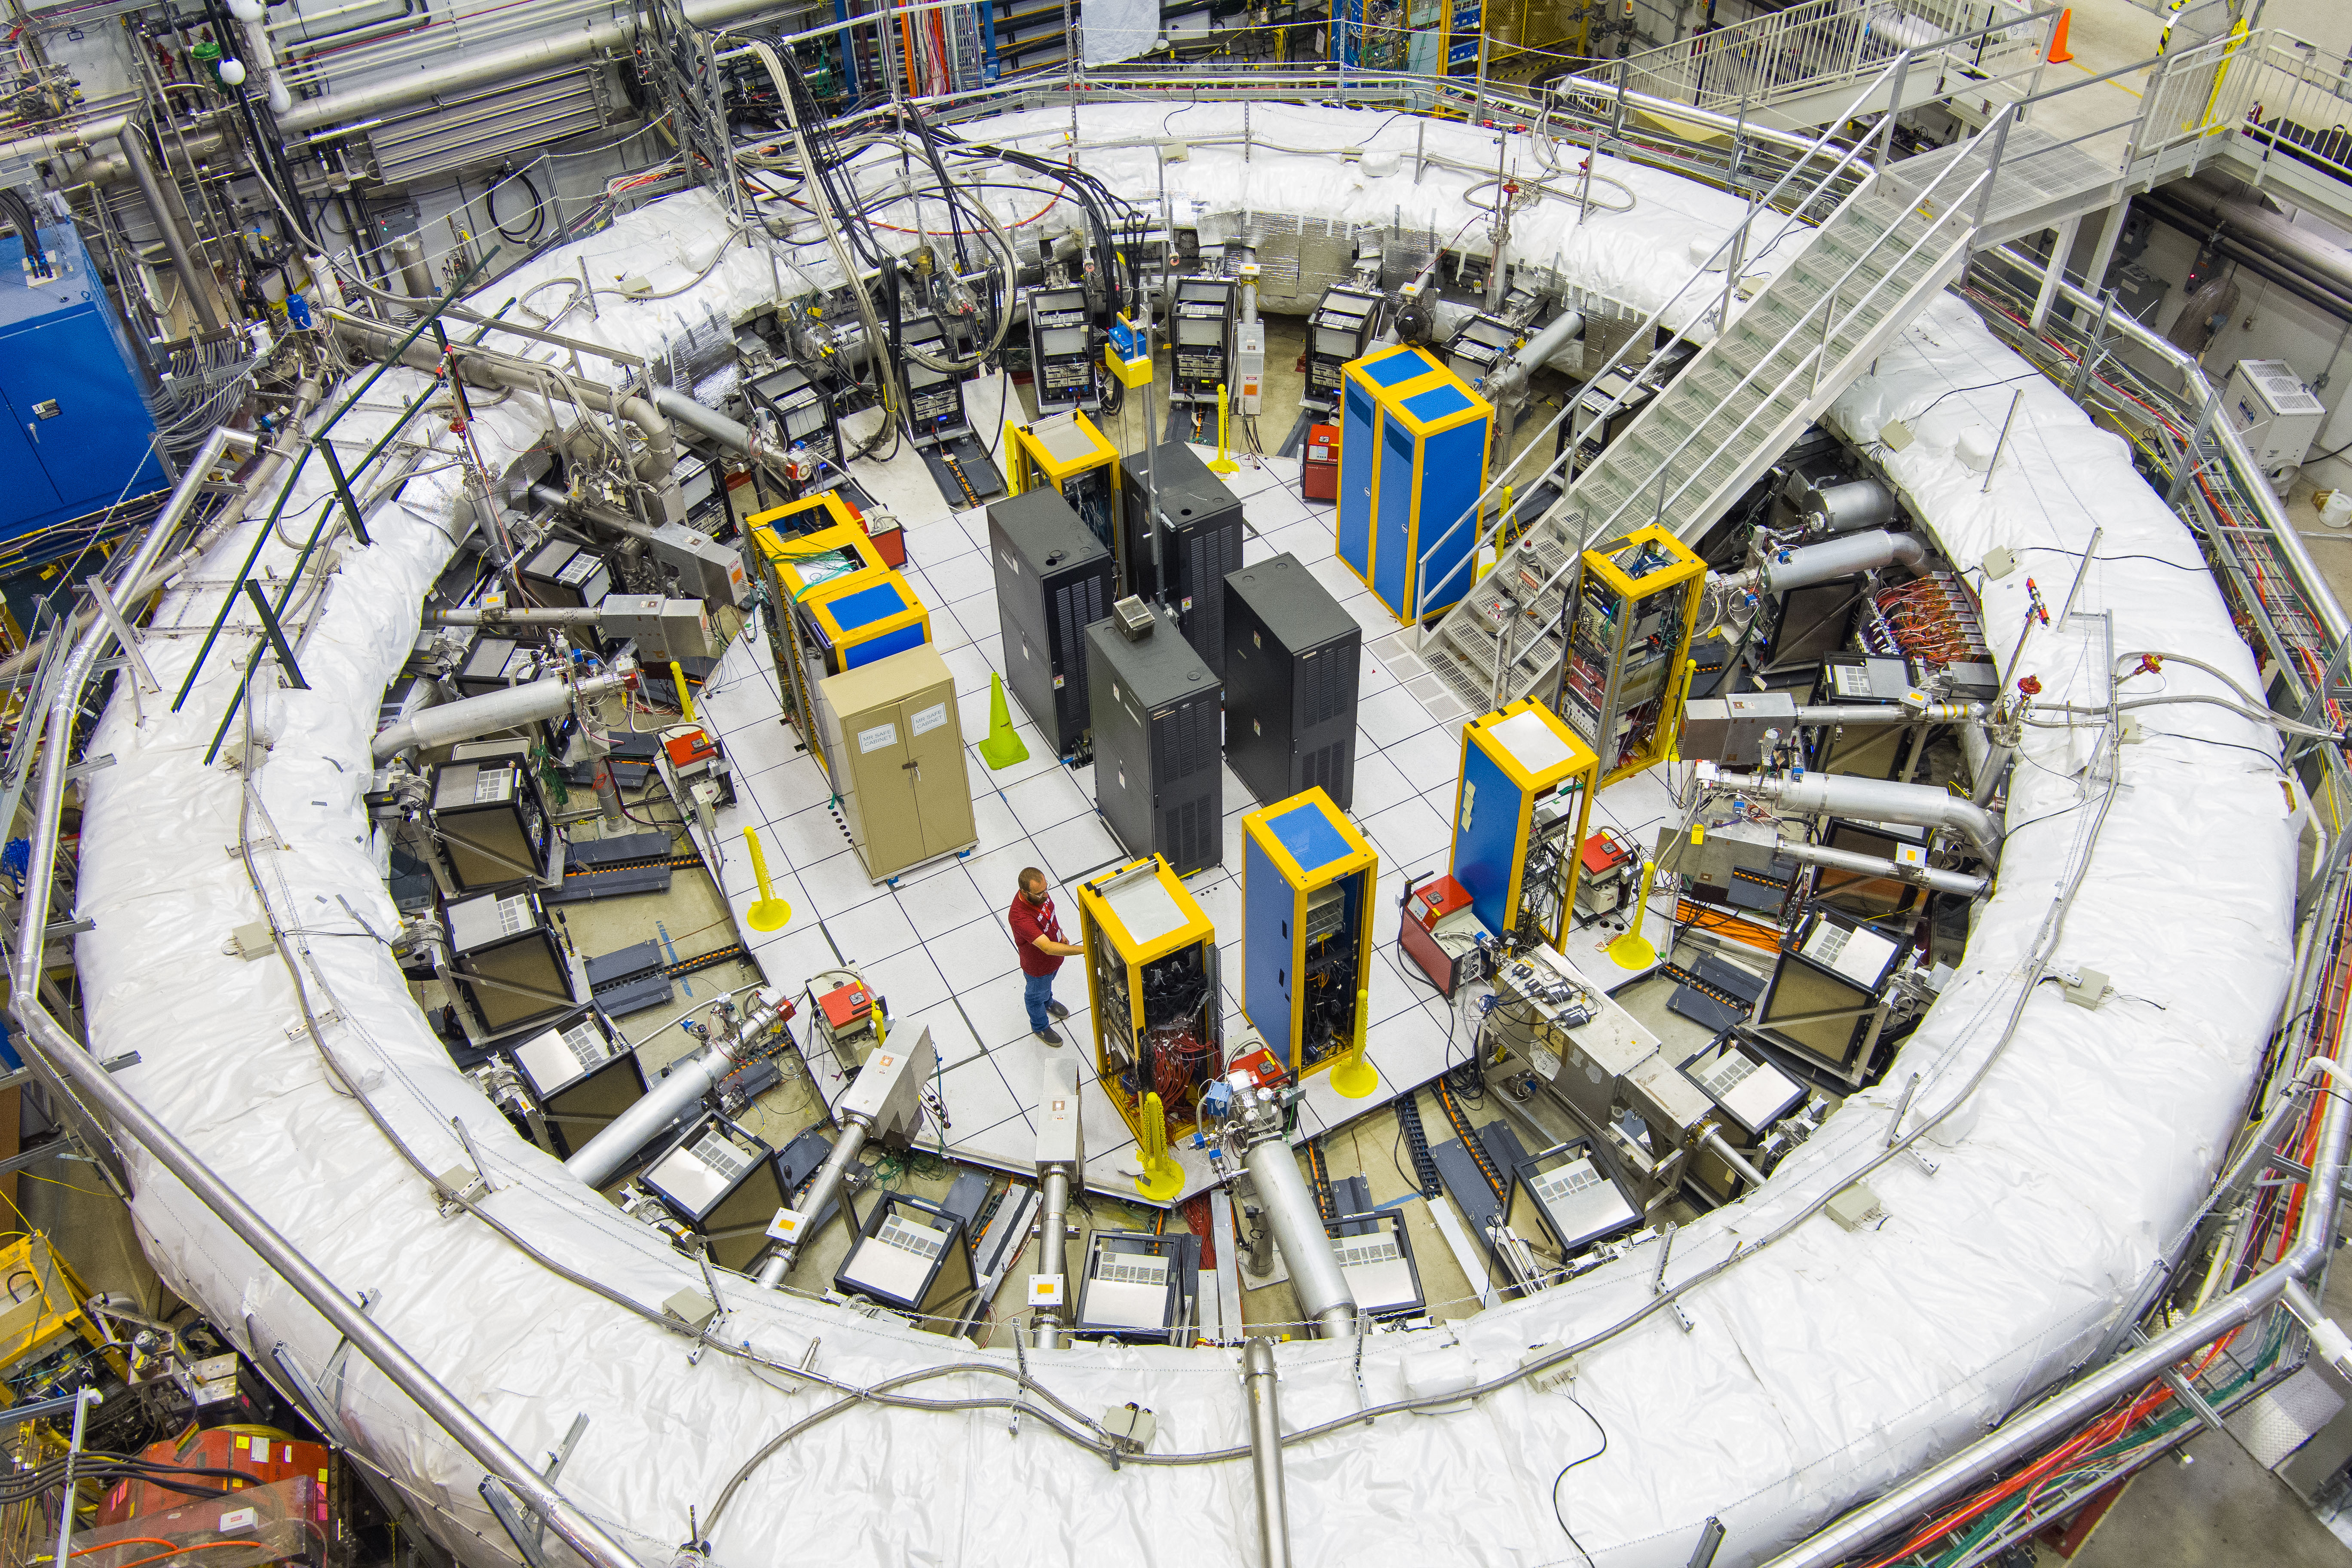 The Muon g-2 magnetic ring at Fermilab in Chicago